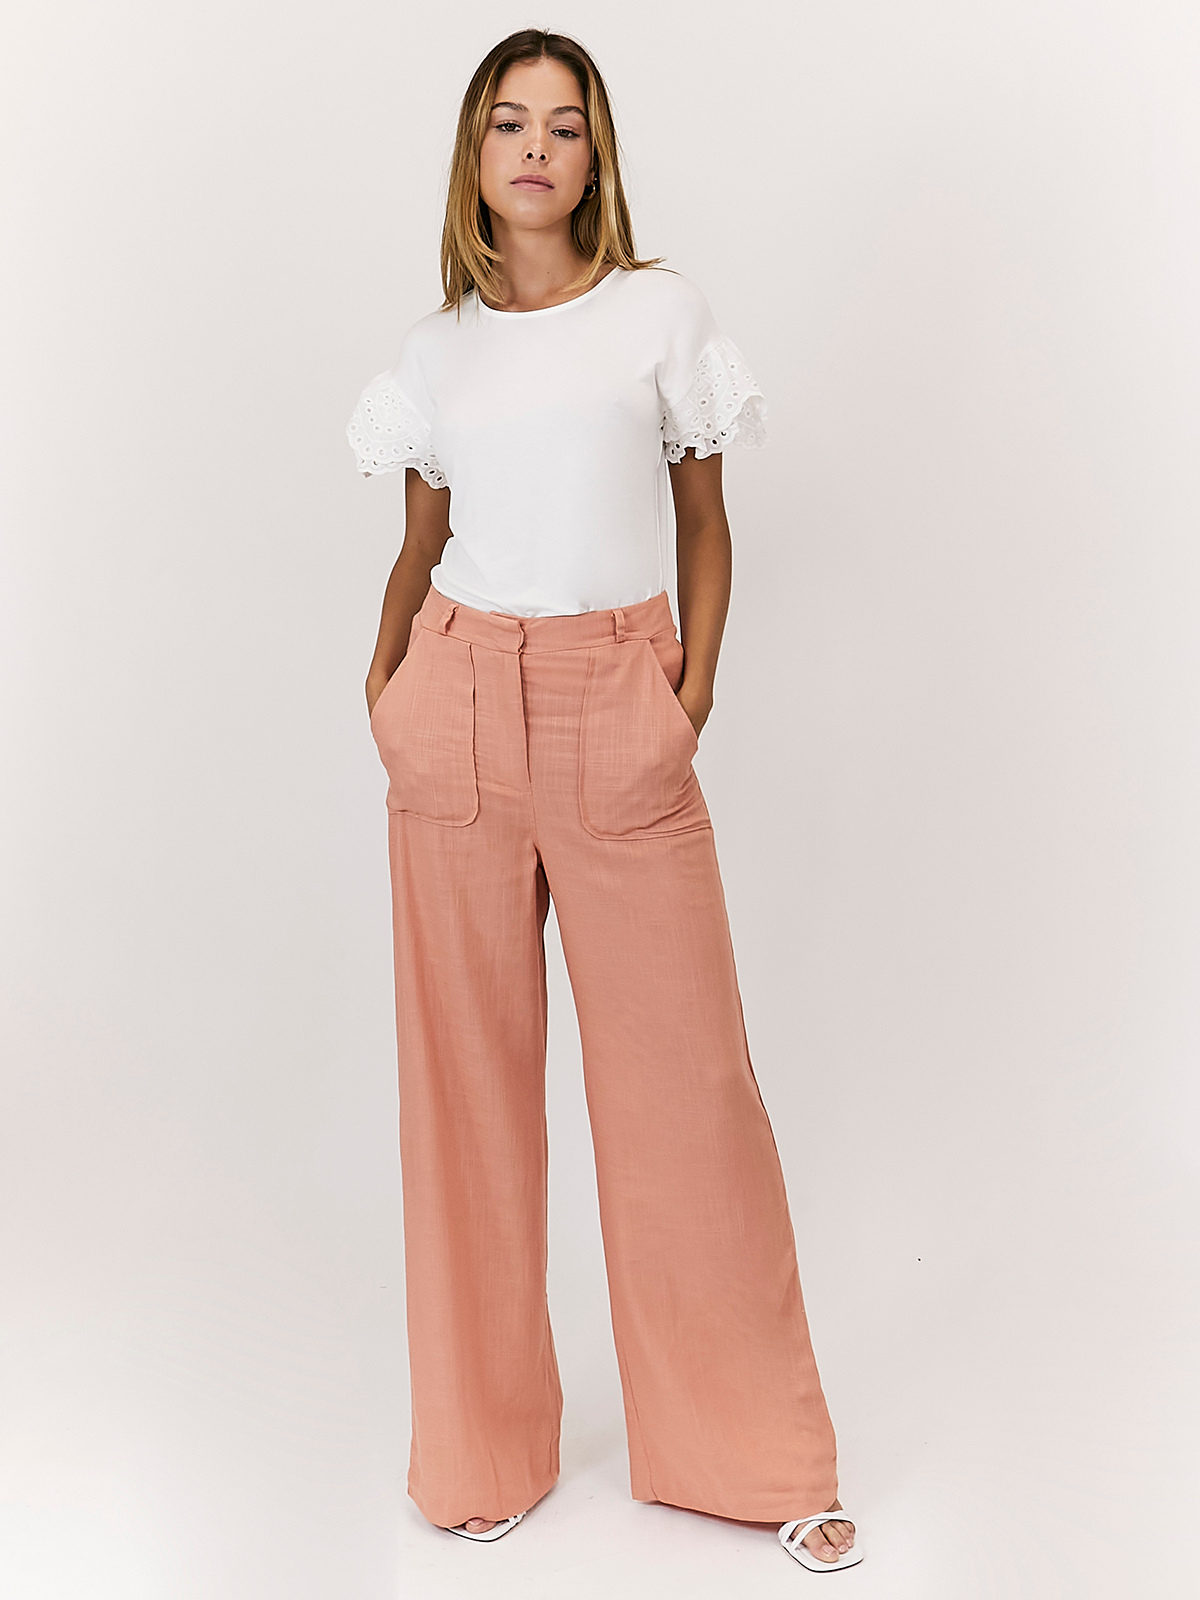 Peach Linen Trousers  Linen Trousers - Style Cheat